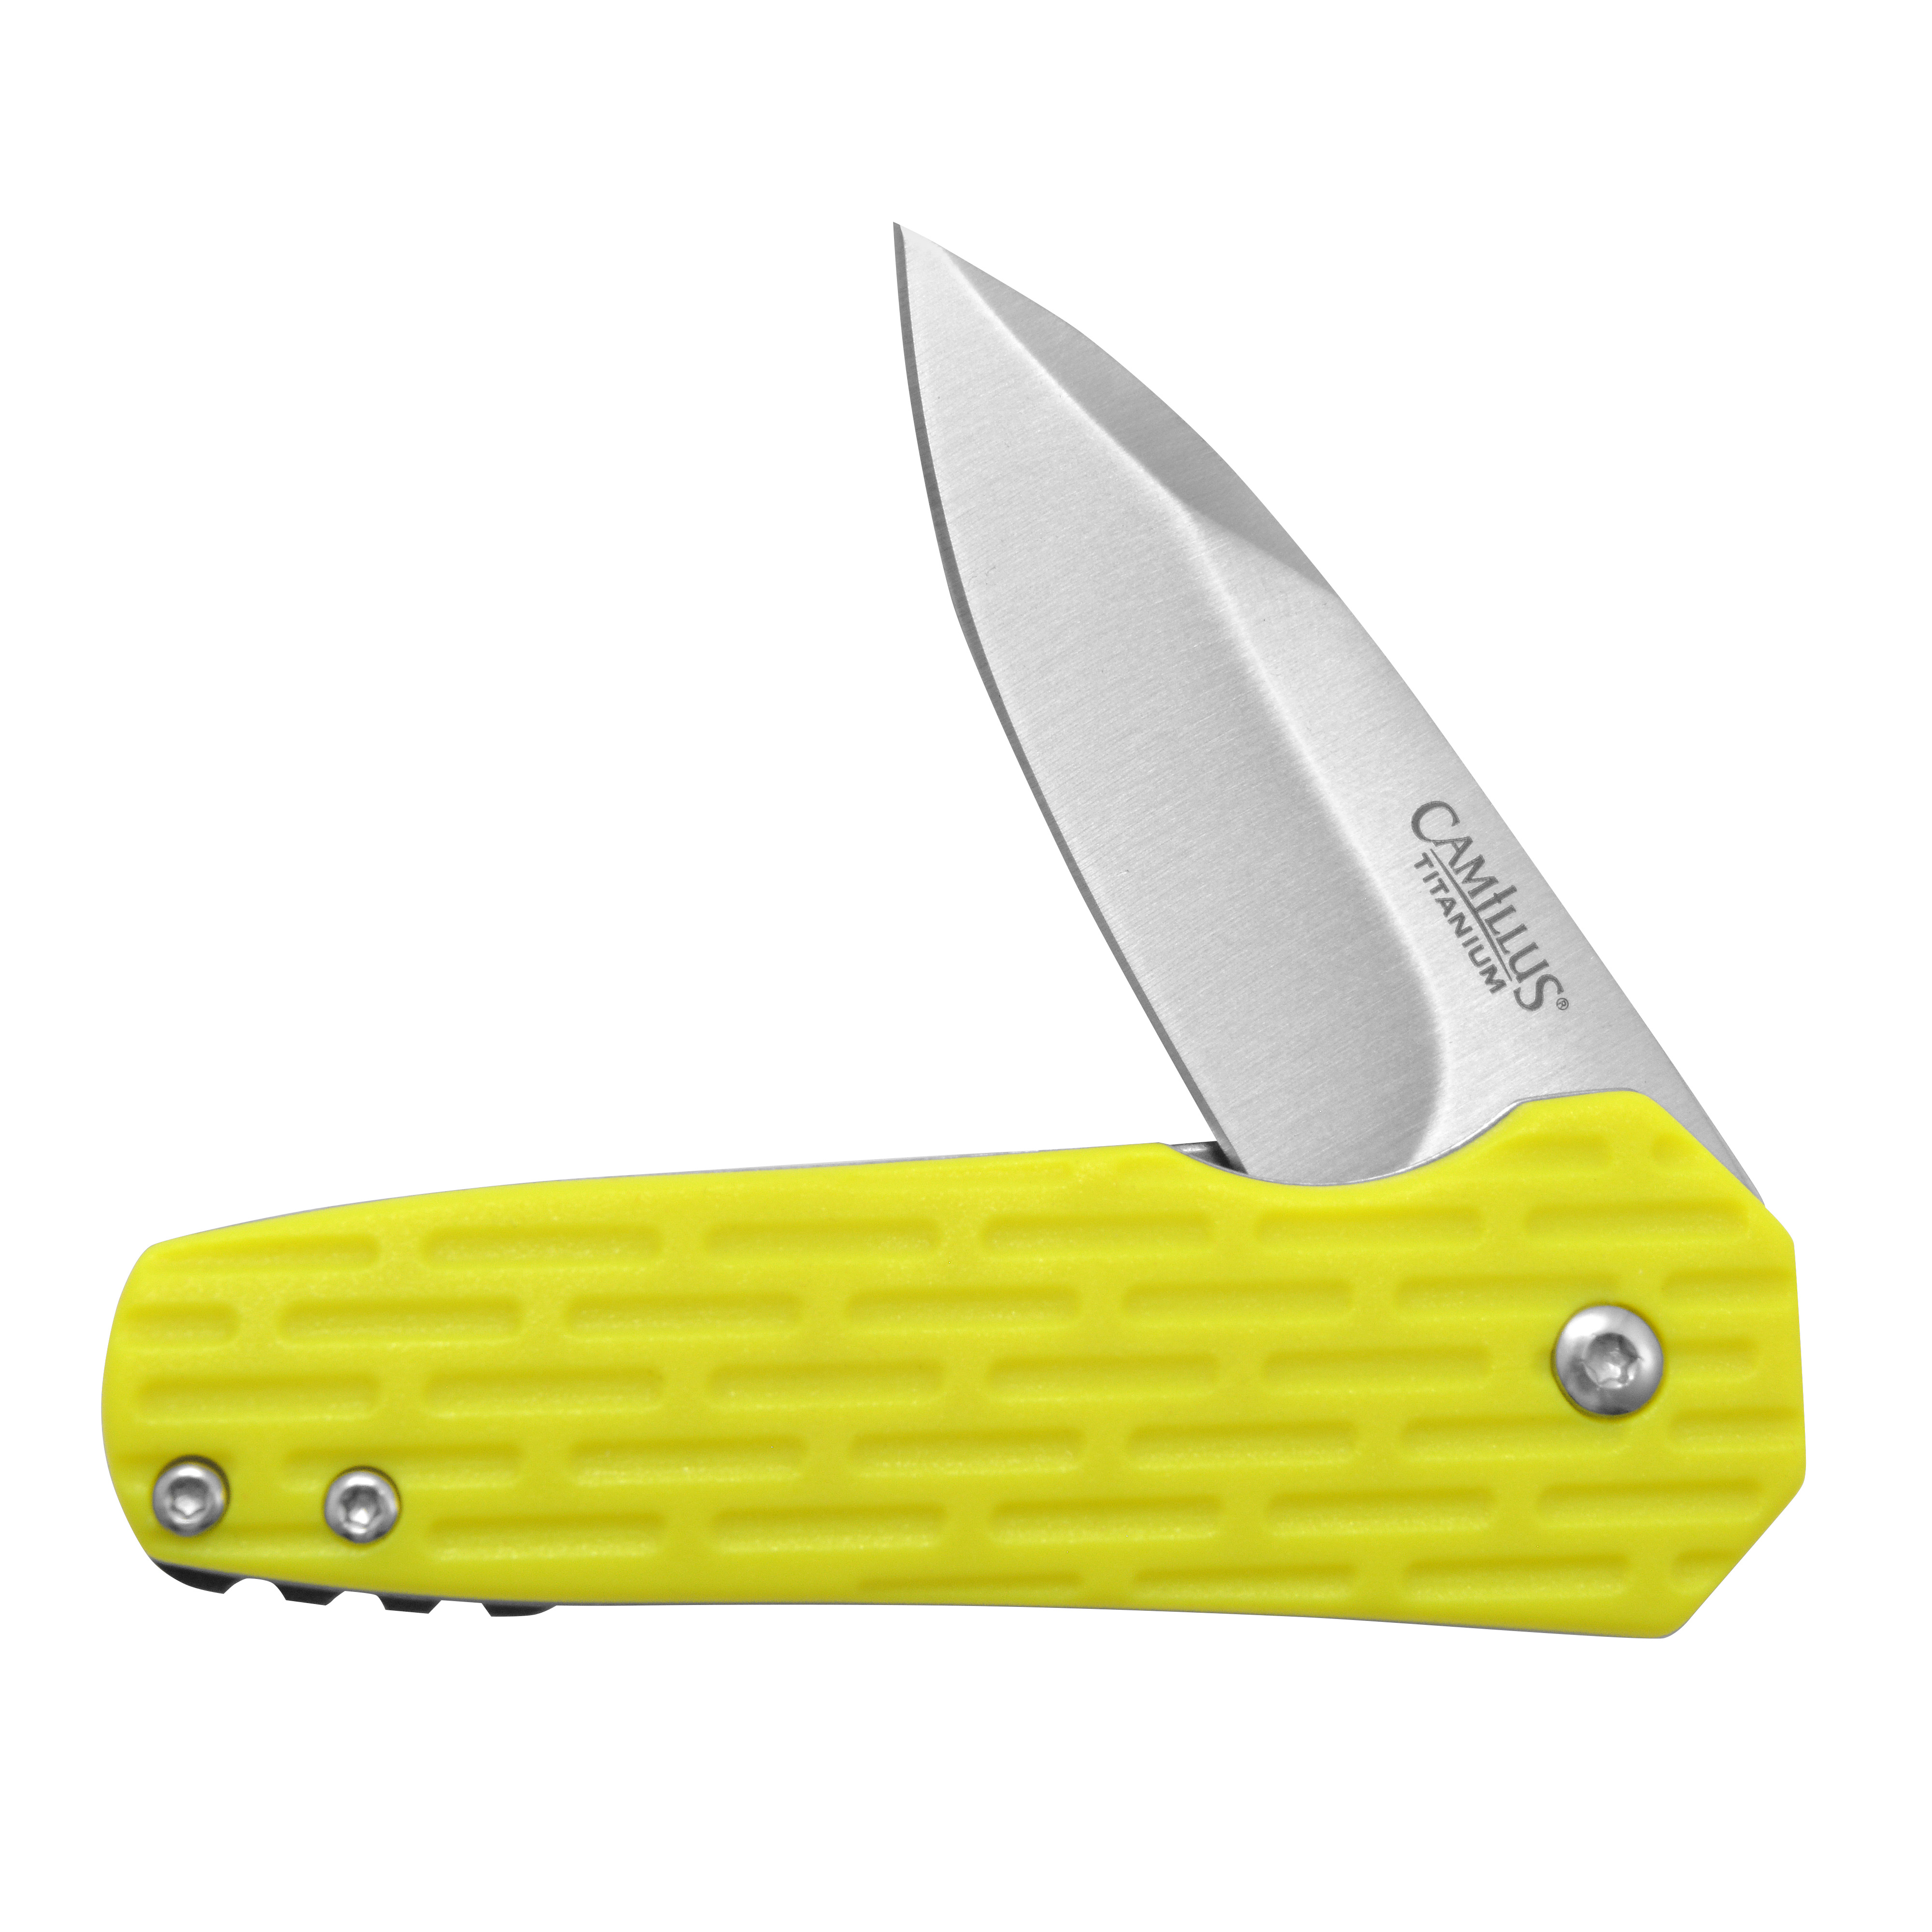 Camillus Knives Clearance @ Walmart as low as $8.60